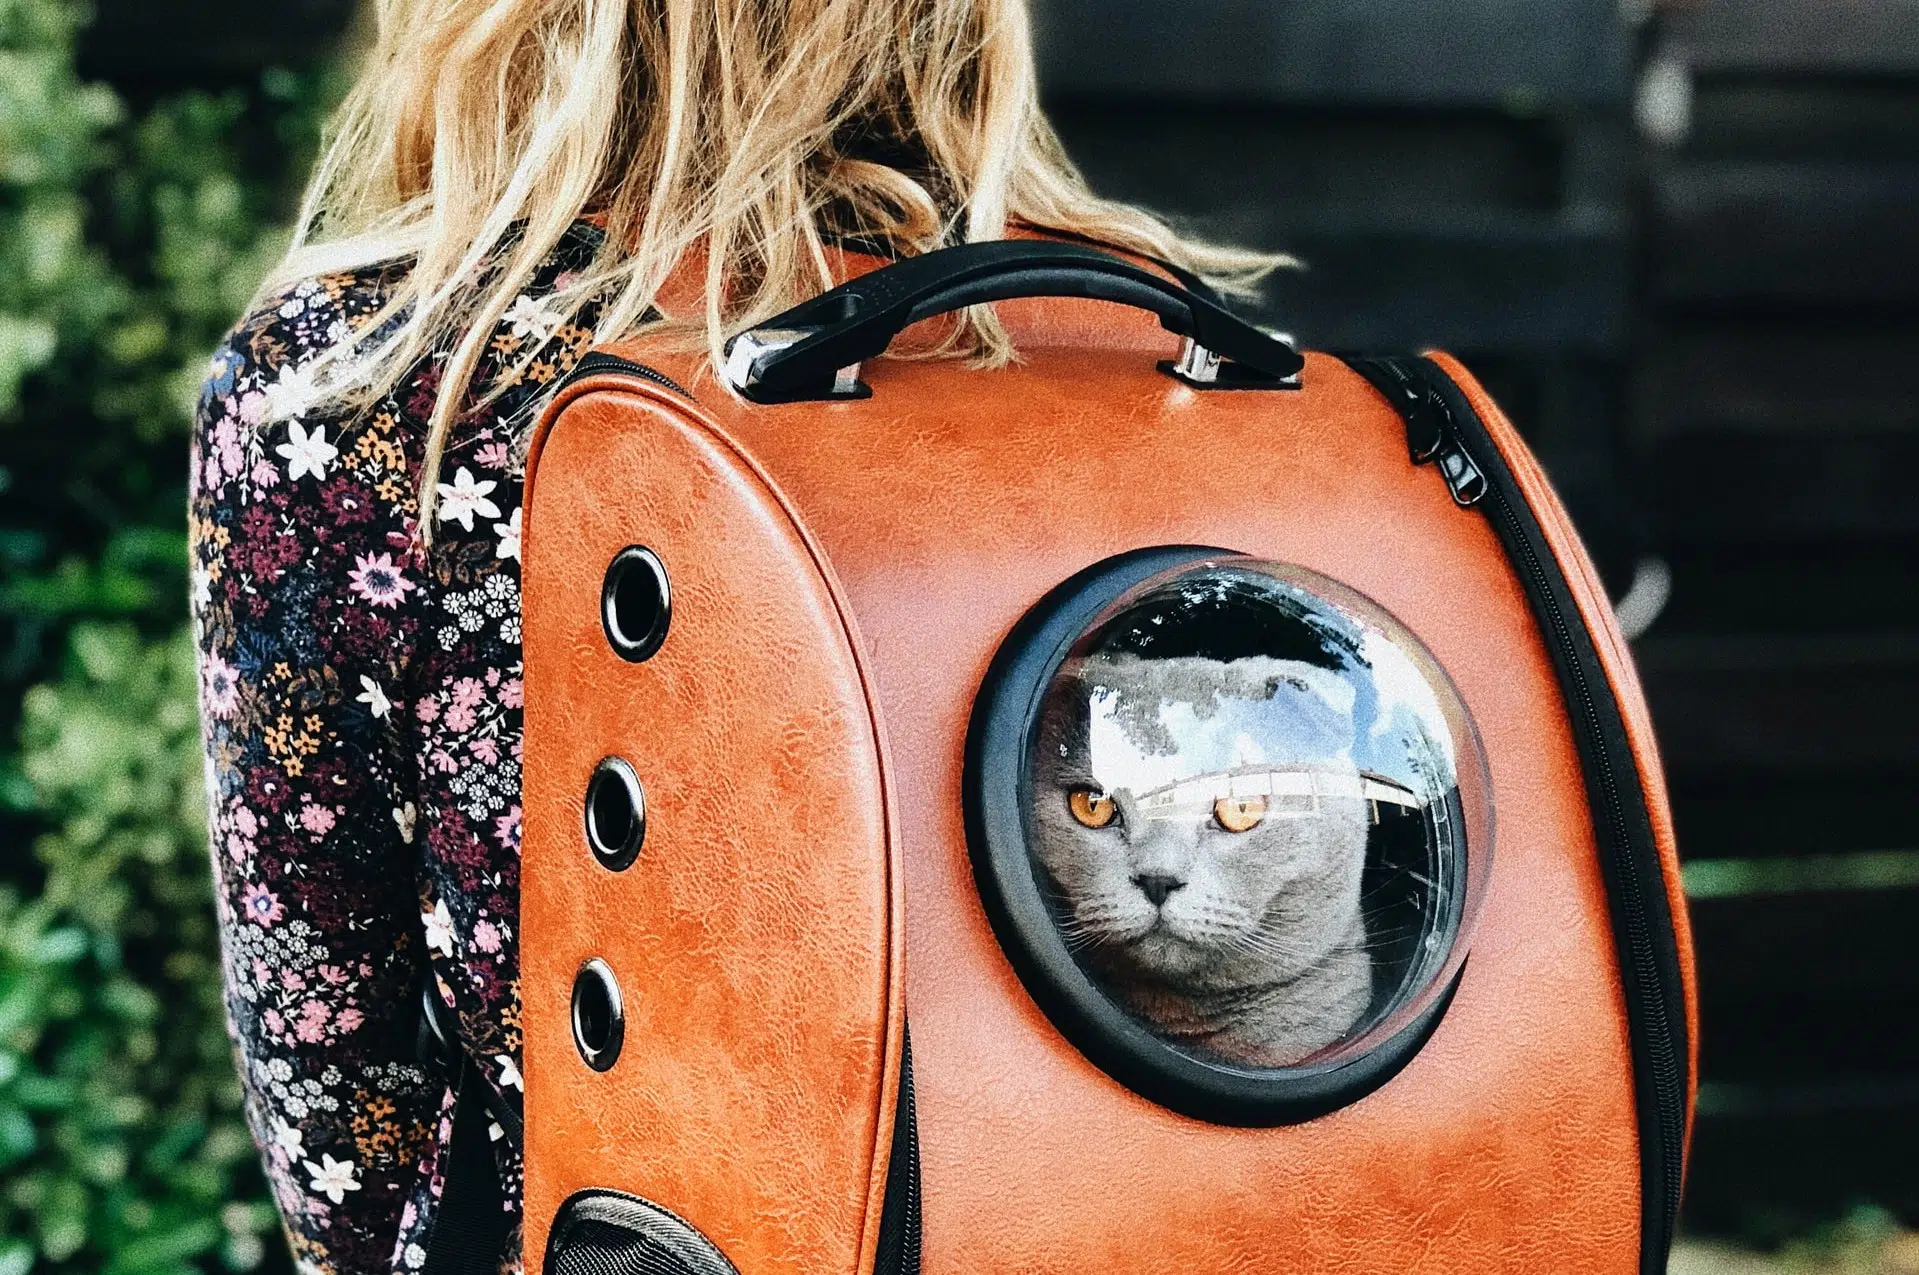 A woman travels with her cat in a pet carrier